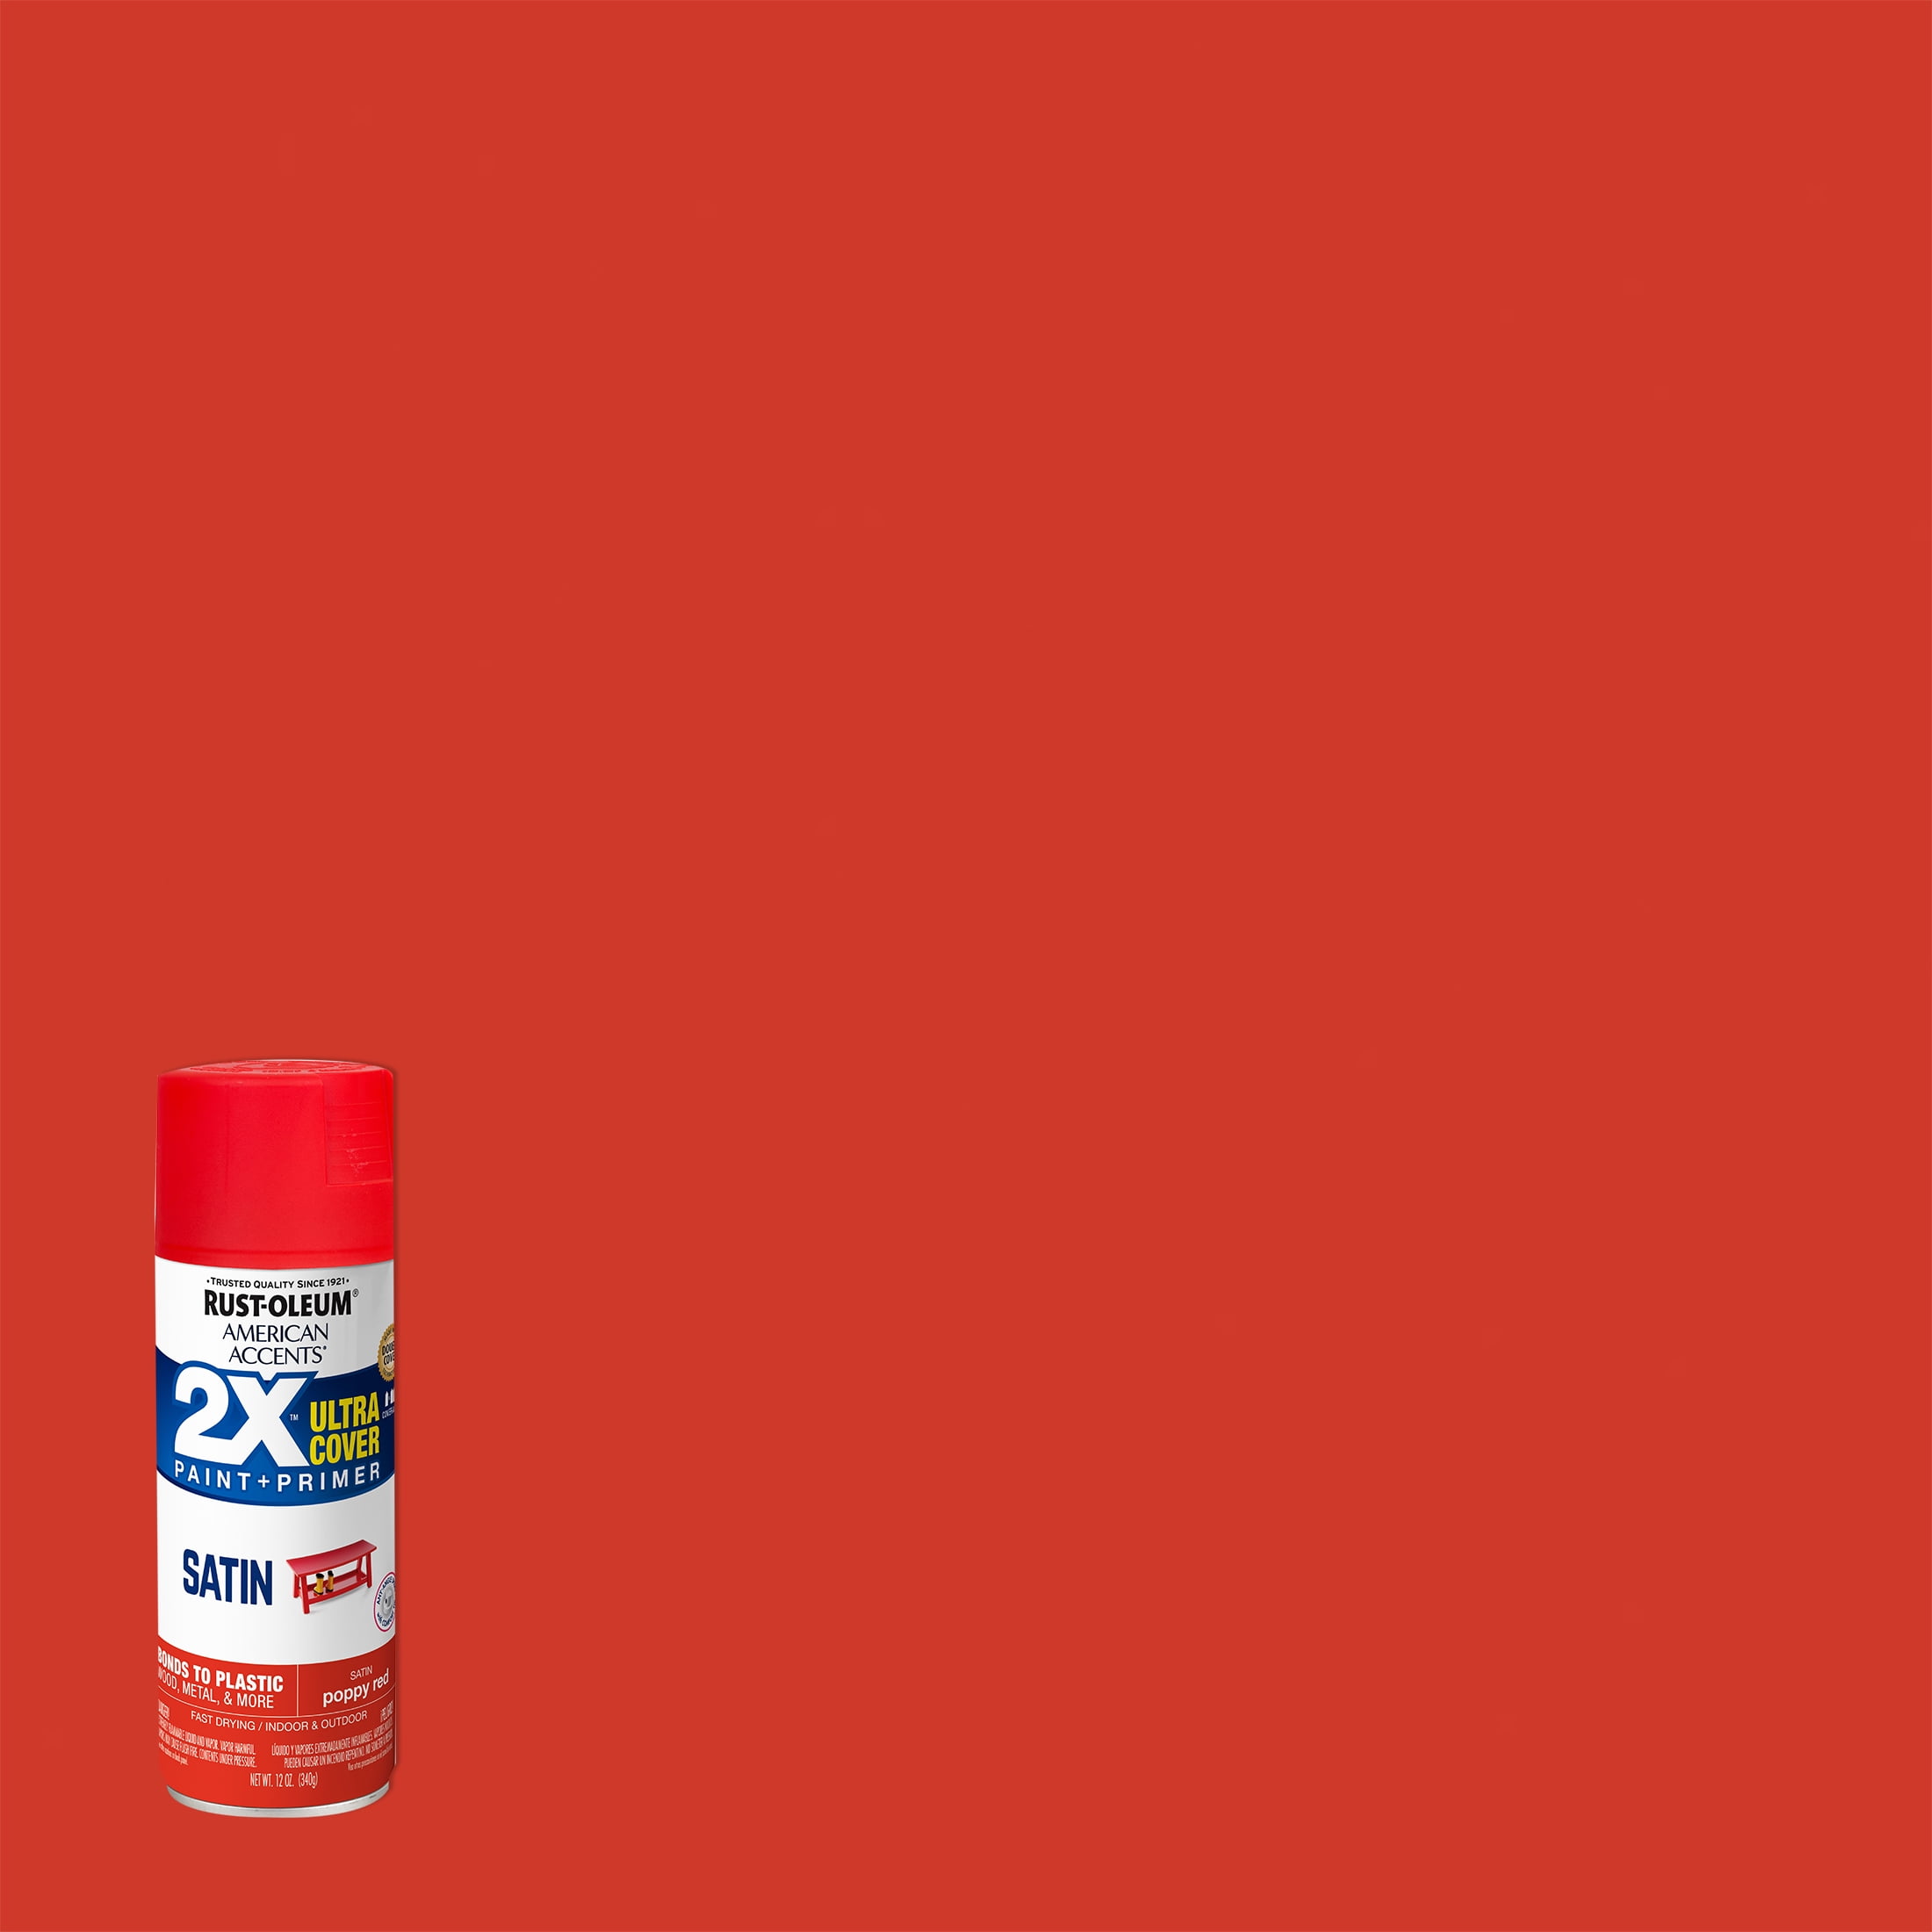 Poppy Red, Rust-Oleum American Accents 2X Ultra Cover Satin Spray Paint- 12 oz